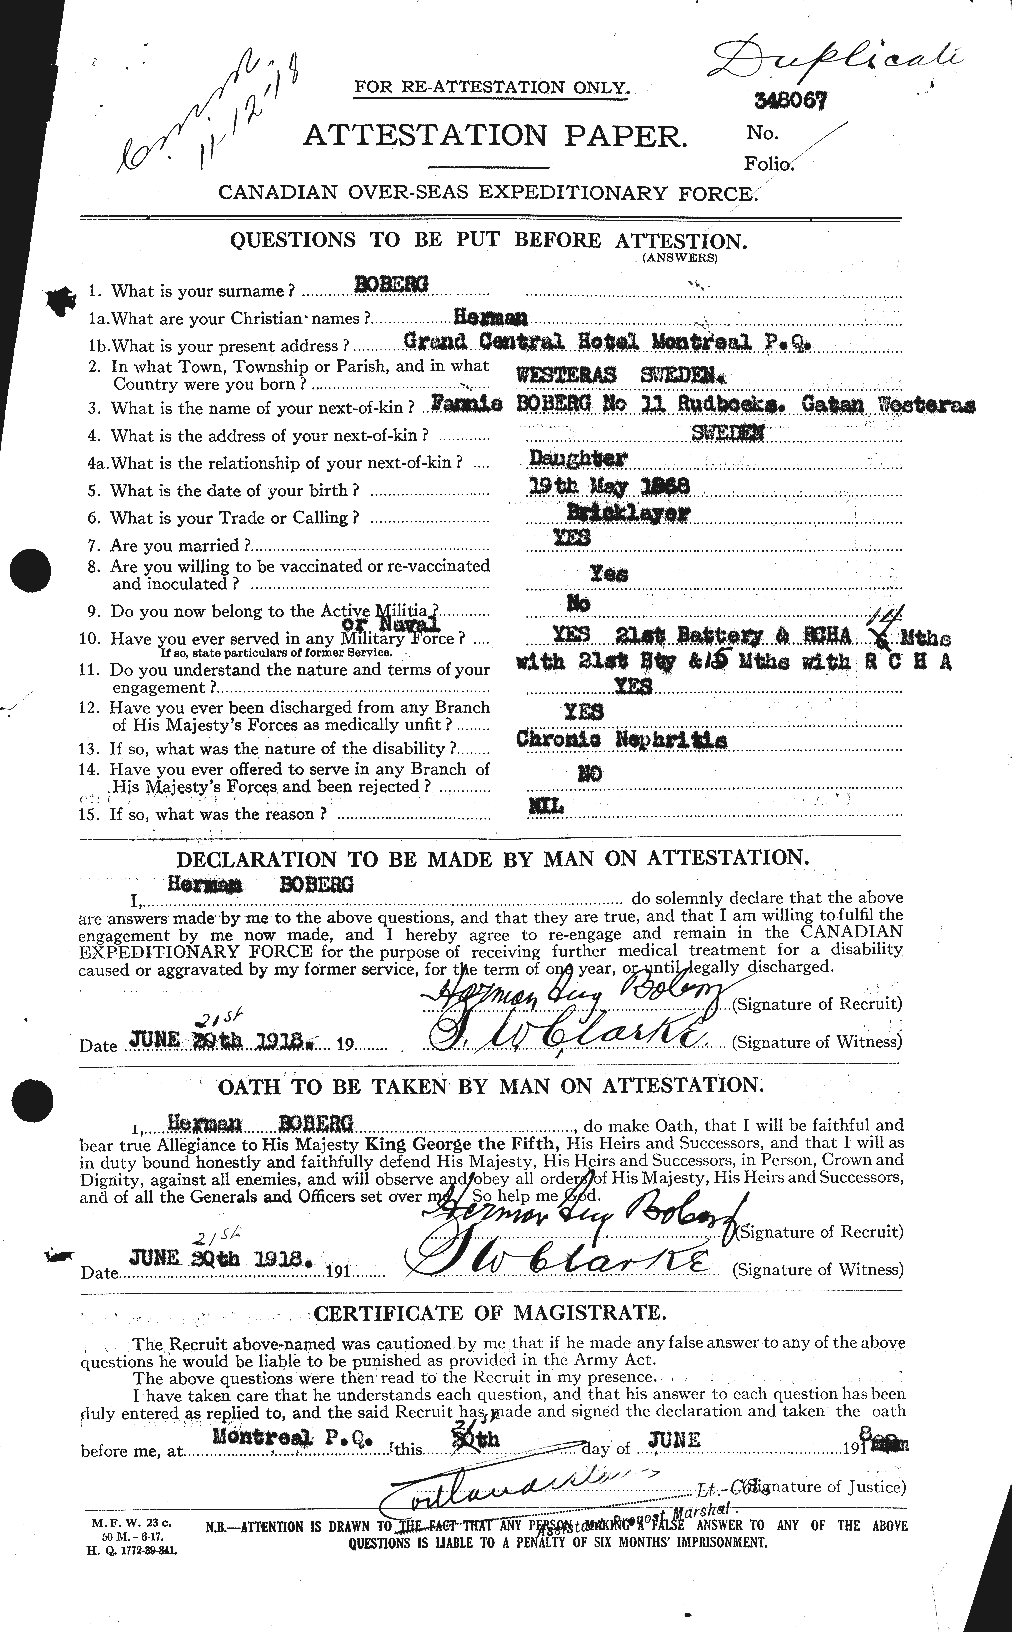 Personnel Records of the First World War - CEF 245347a